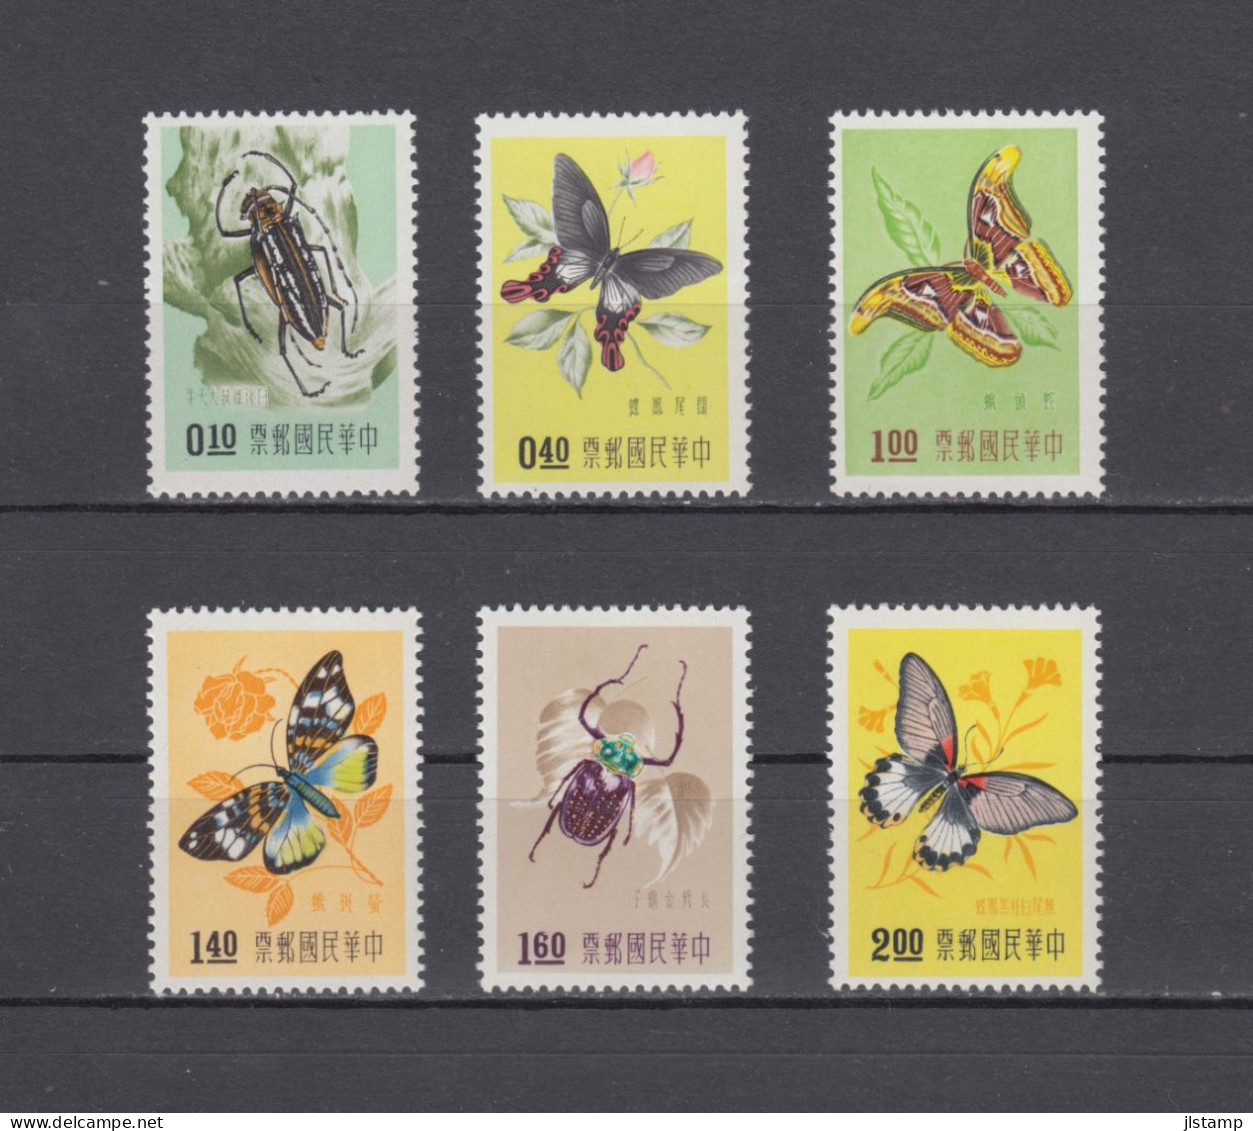 China Taiwan 1958 Insect And Butterfly Stamps Set,Scott# 1183-1188,OG,MNH,VF - Nuevos